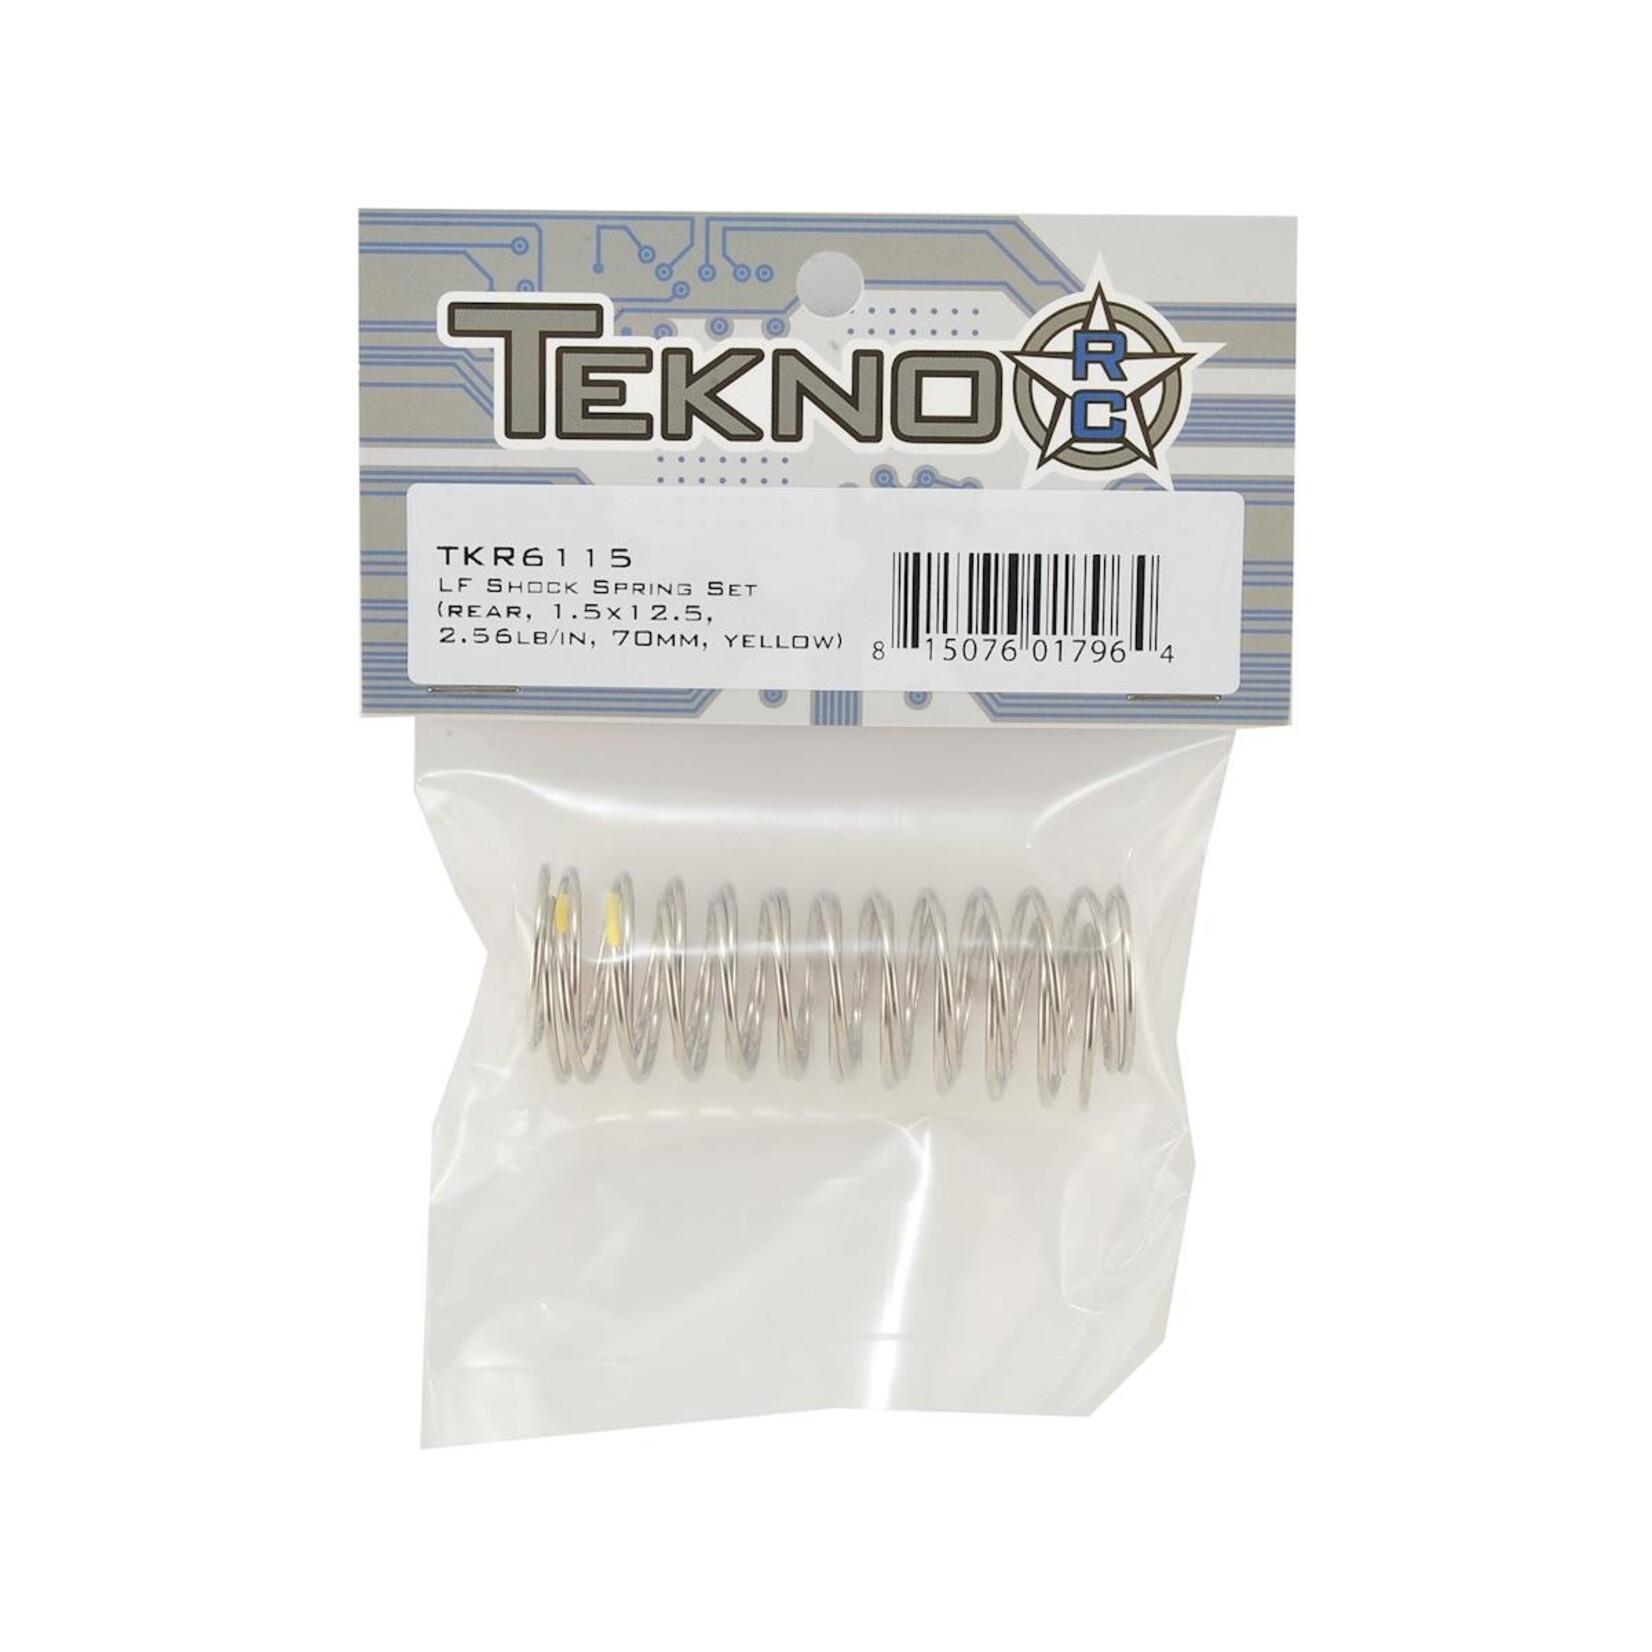 Tekno RC Tekno RC Low Frequency 70mm Rear Shock Spring Set (Yellow - 2.56lb/in) (1.5x12.5) #TKR6115